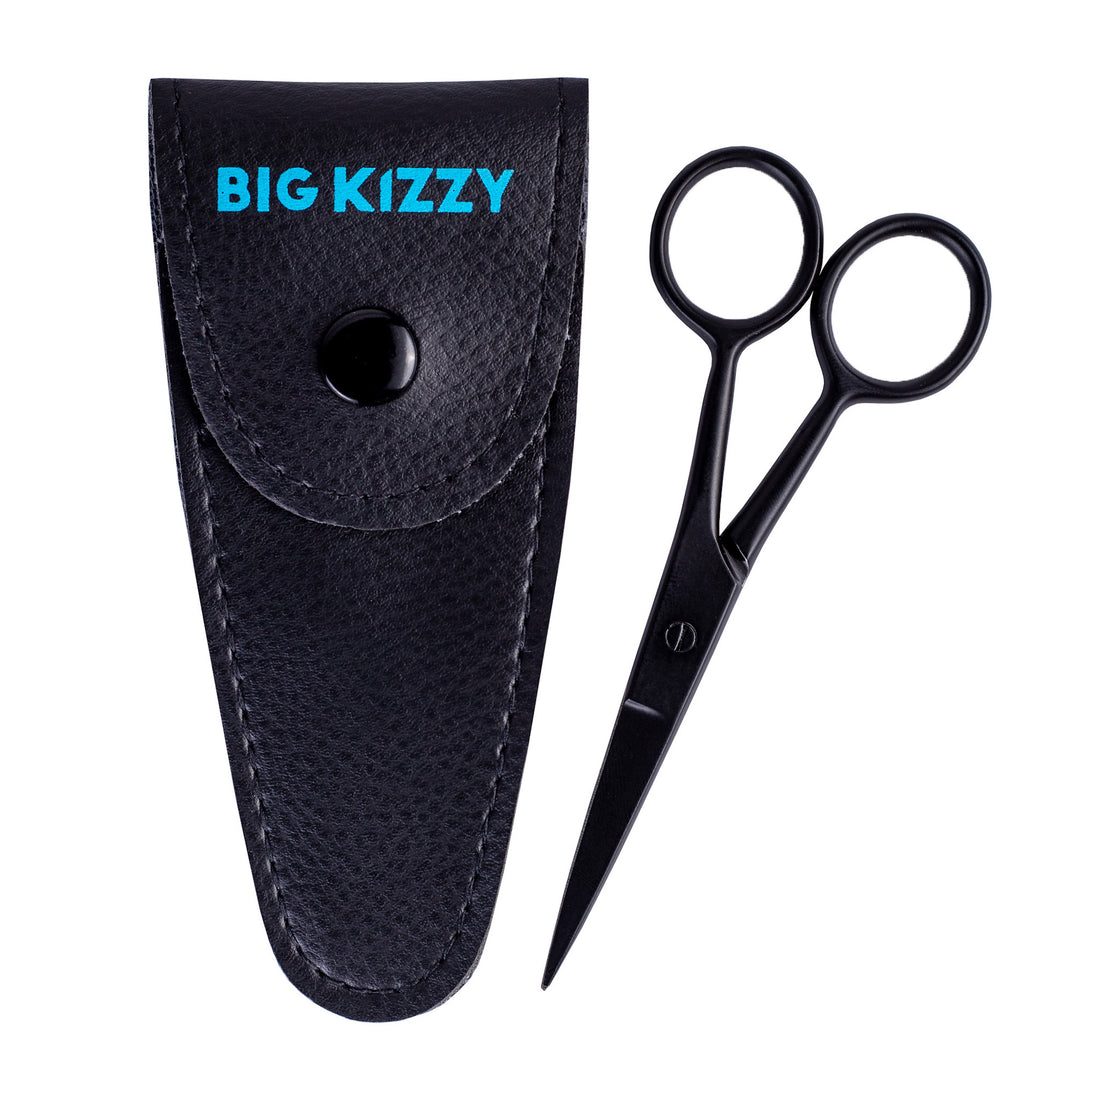 Small scissors for hand tied weft extensions, machine weft extensions, and hybrid weft extensions with pouch